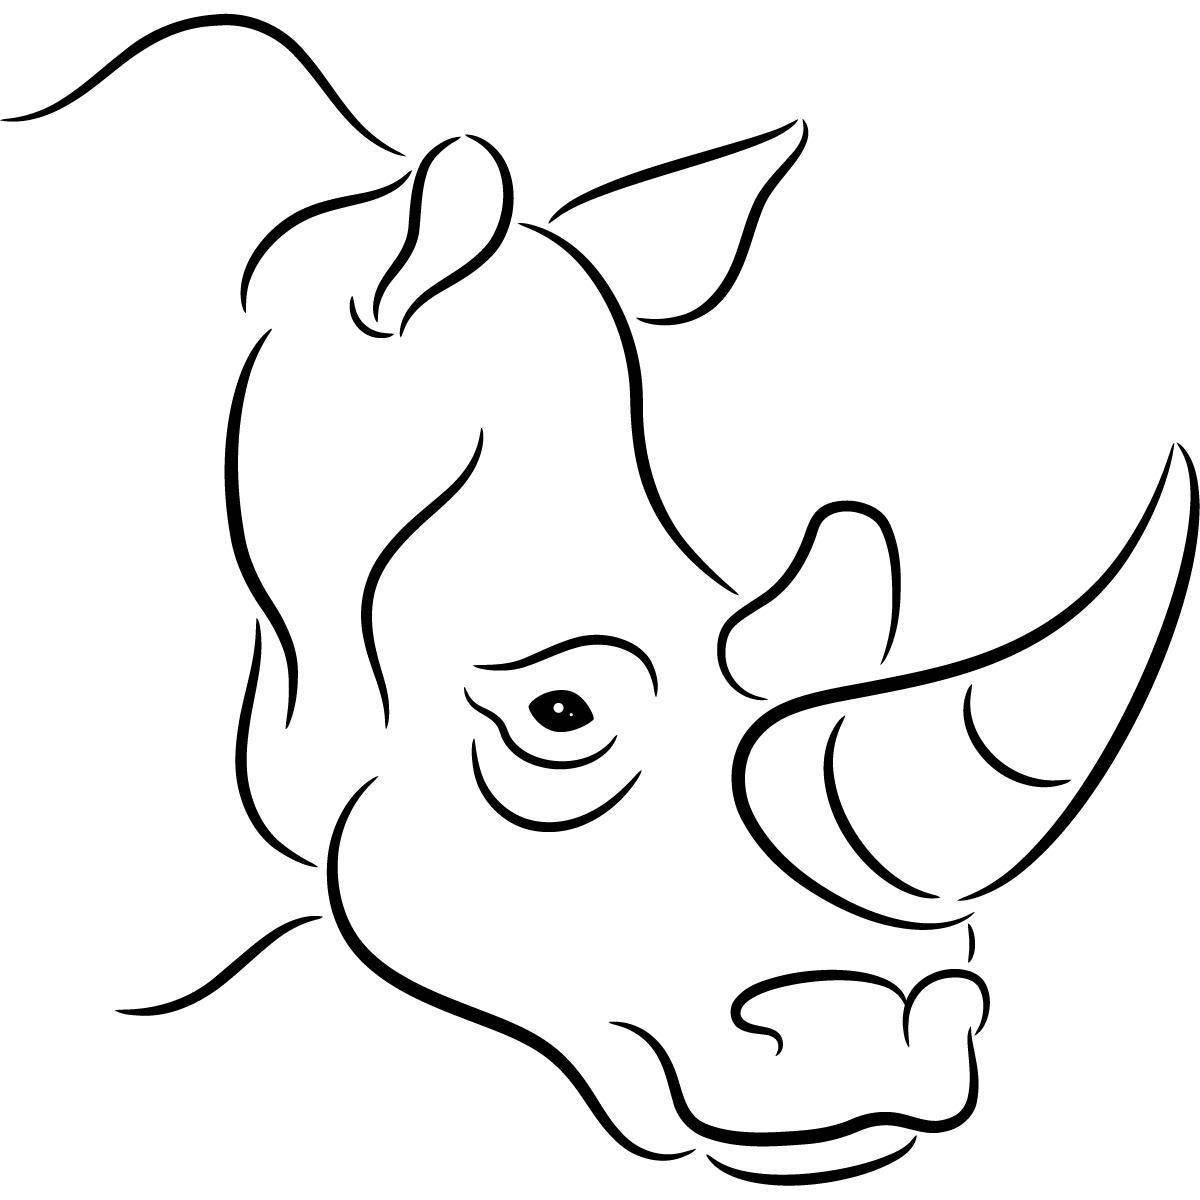 Outline Pictures Rhino - ClipArt Best